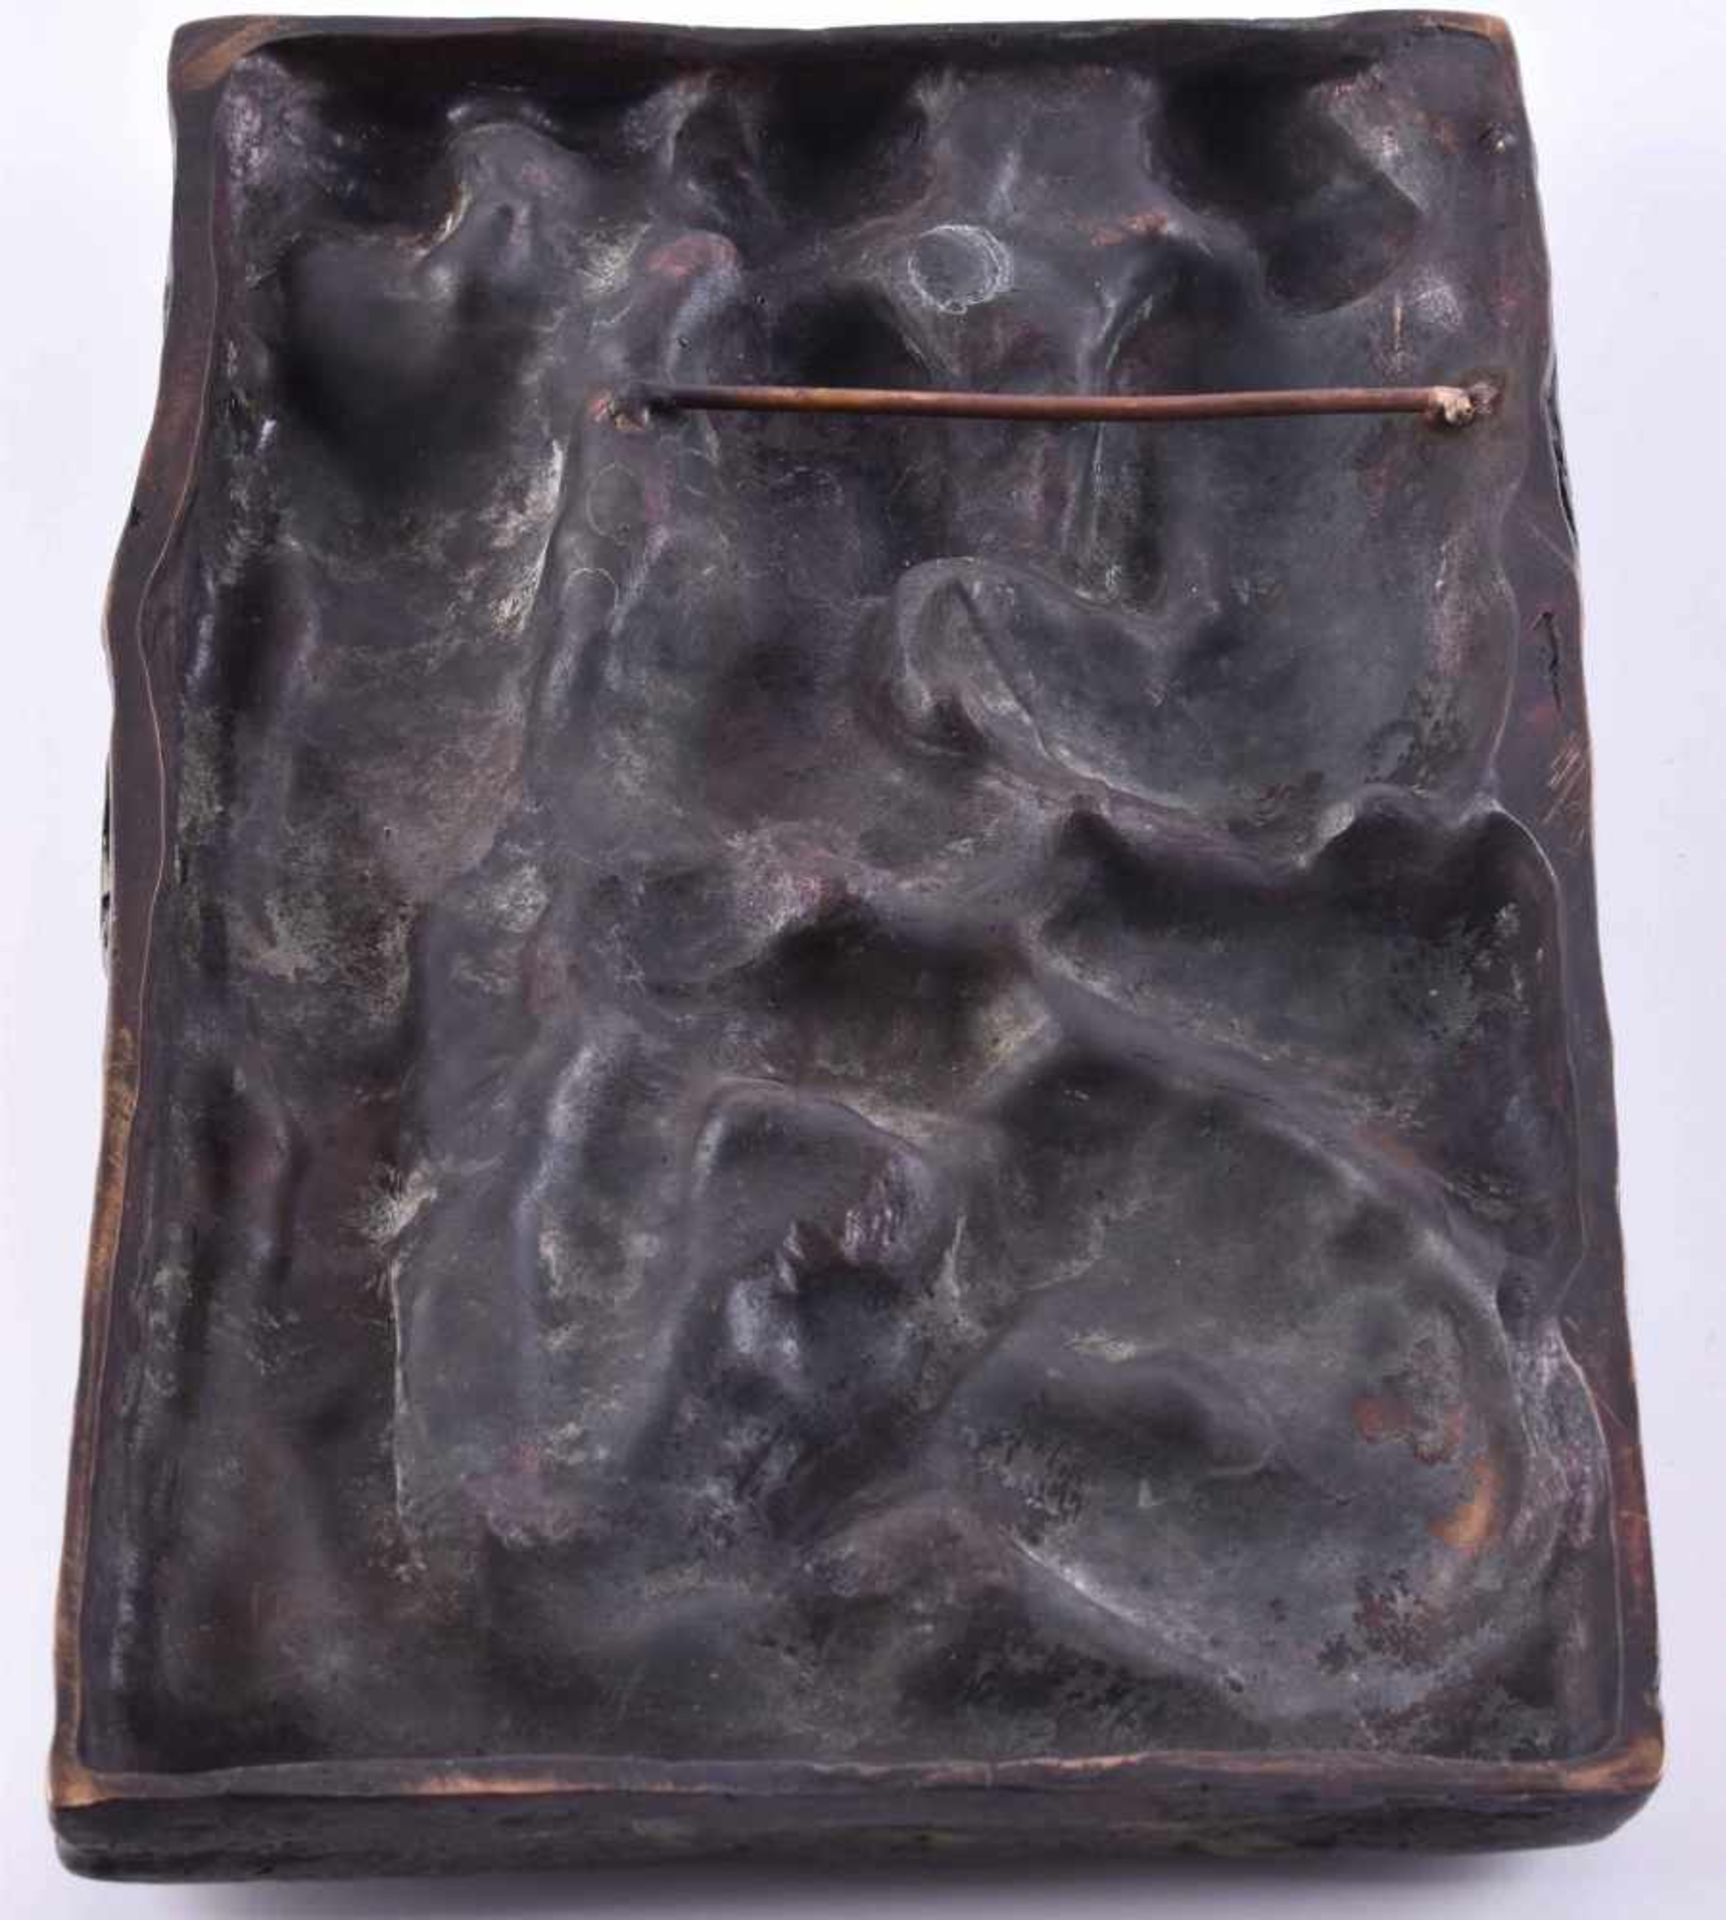 Rolf WINKLER (1930-2001)"Im Bade"sculpture - Bronze relief, 25 cm x 18 cm,signed on the lower right, - Image 6 of 6